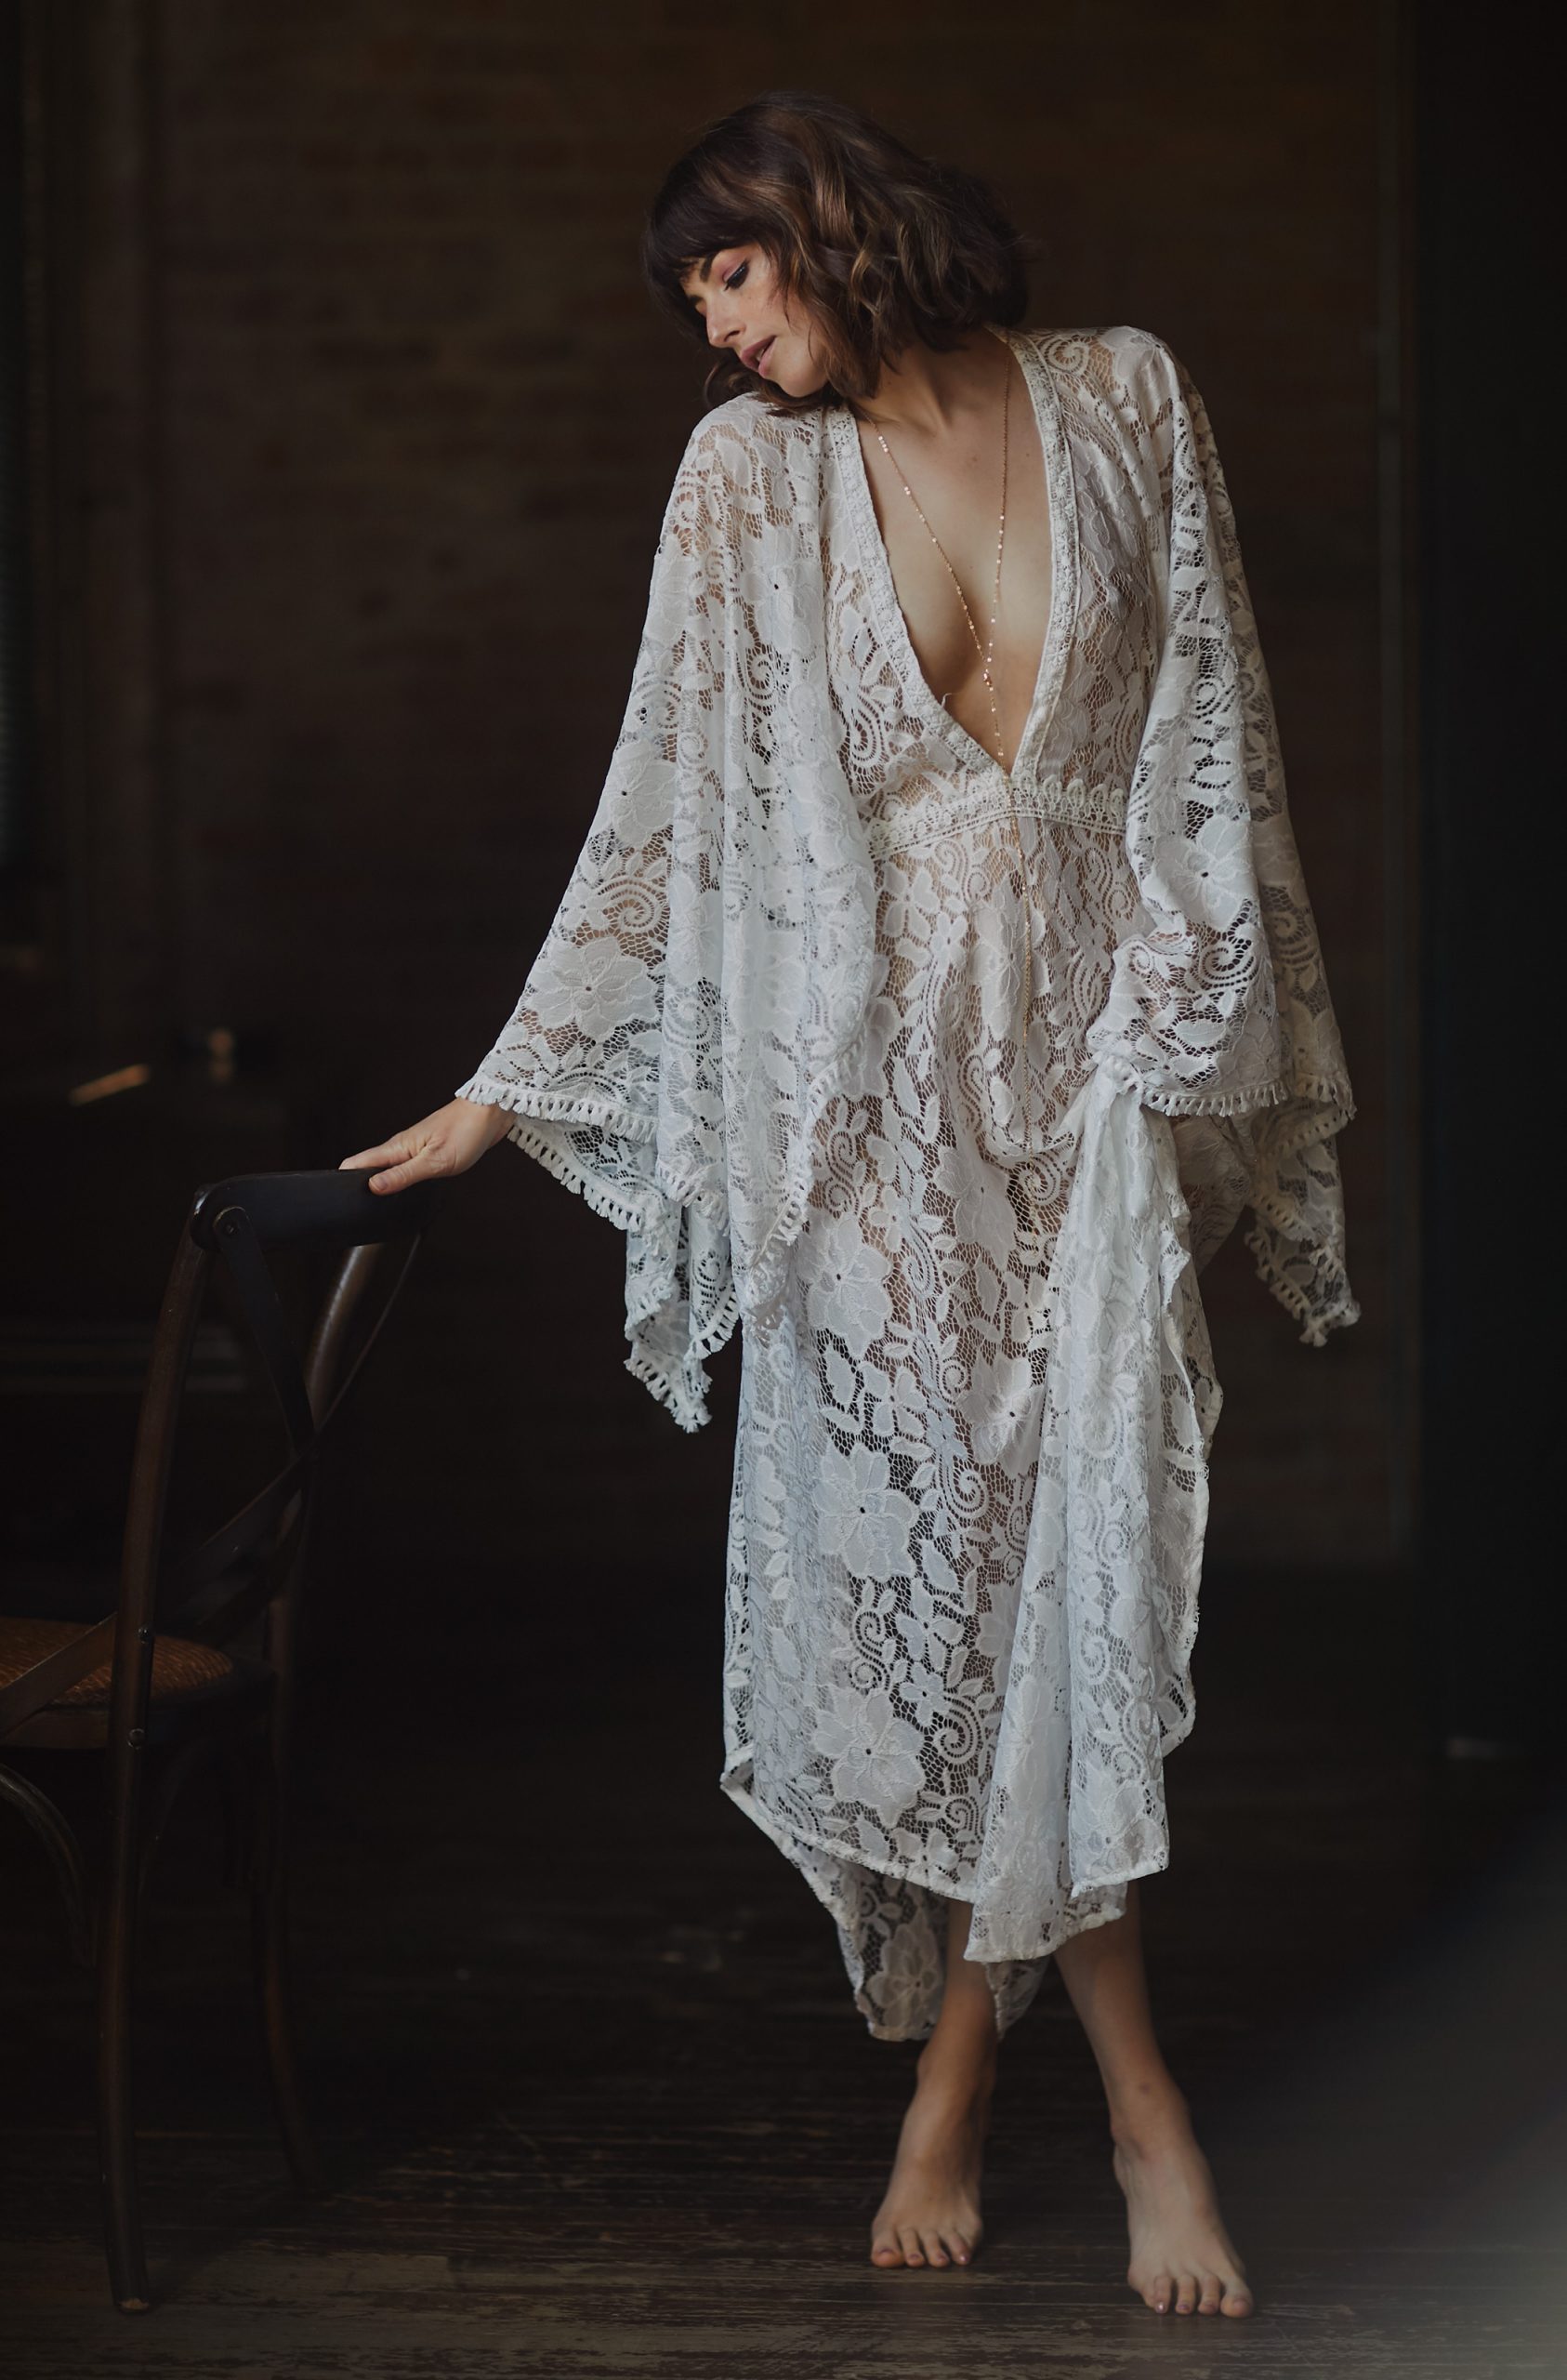 sensual woman standing next to chair in night gown chicago boudoir